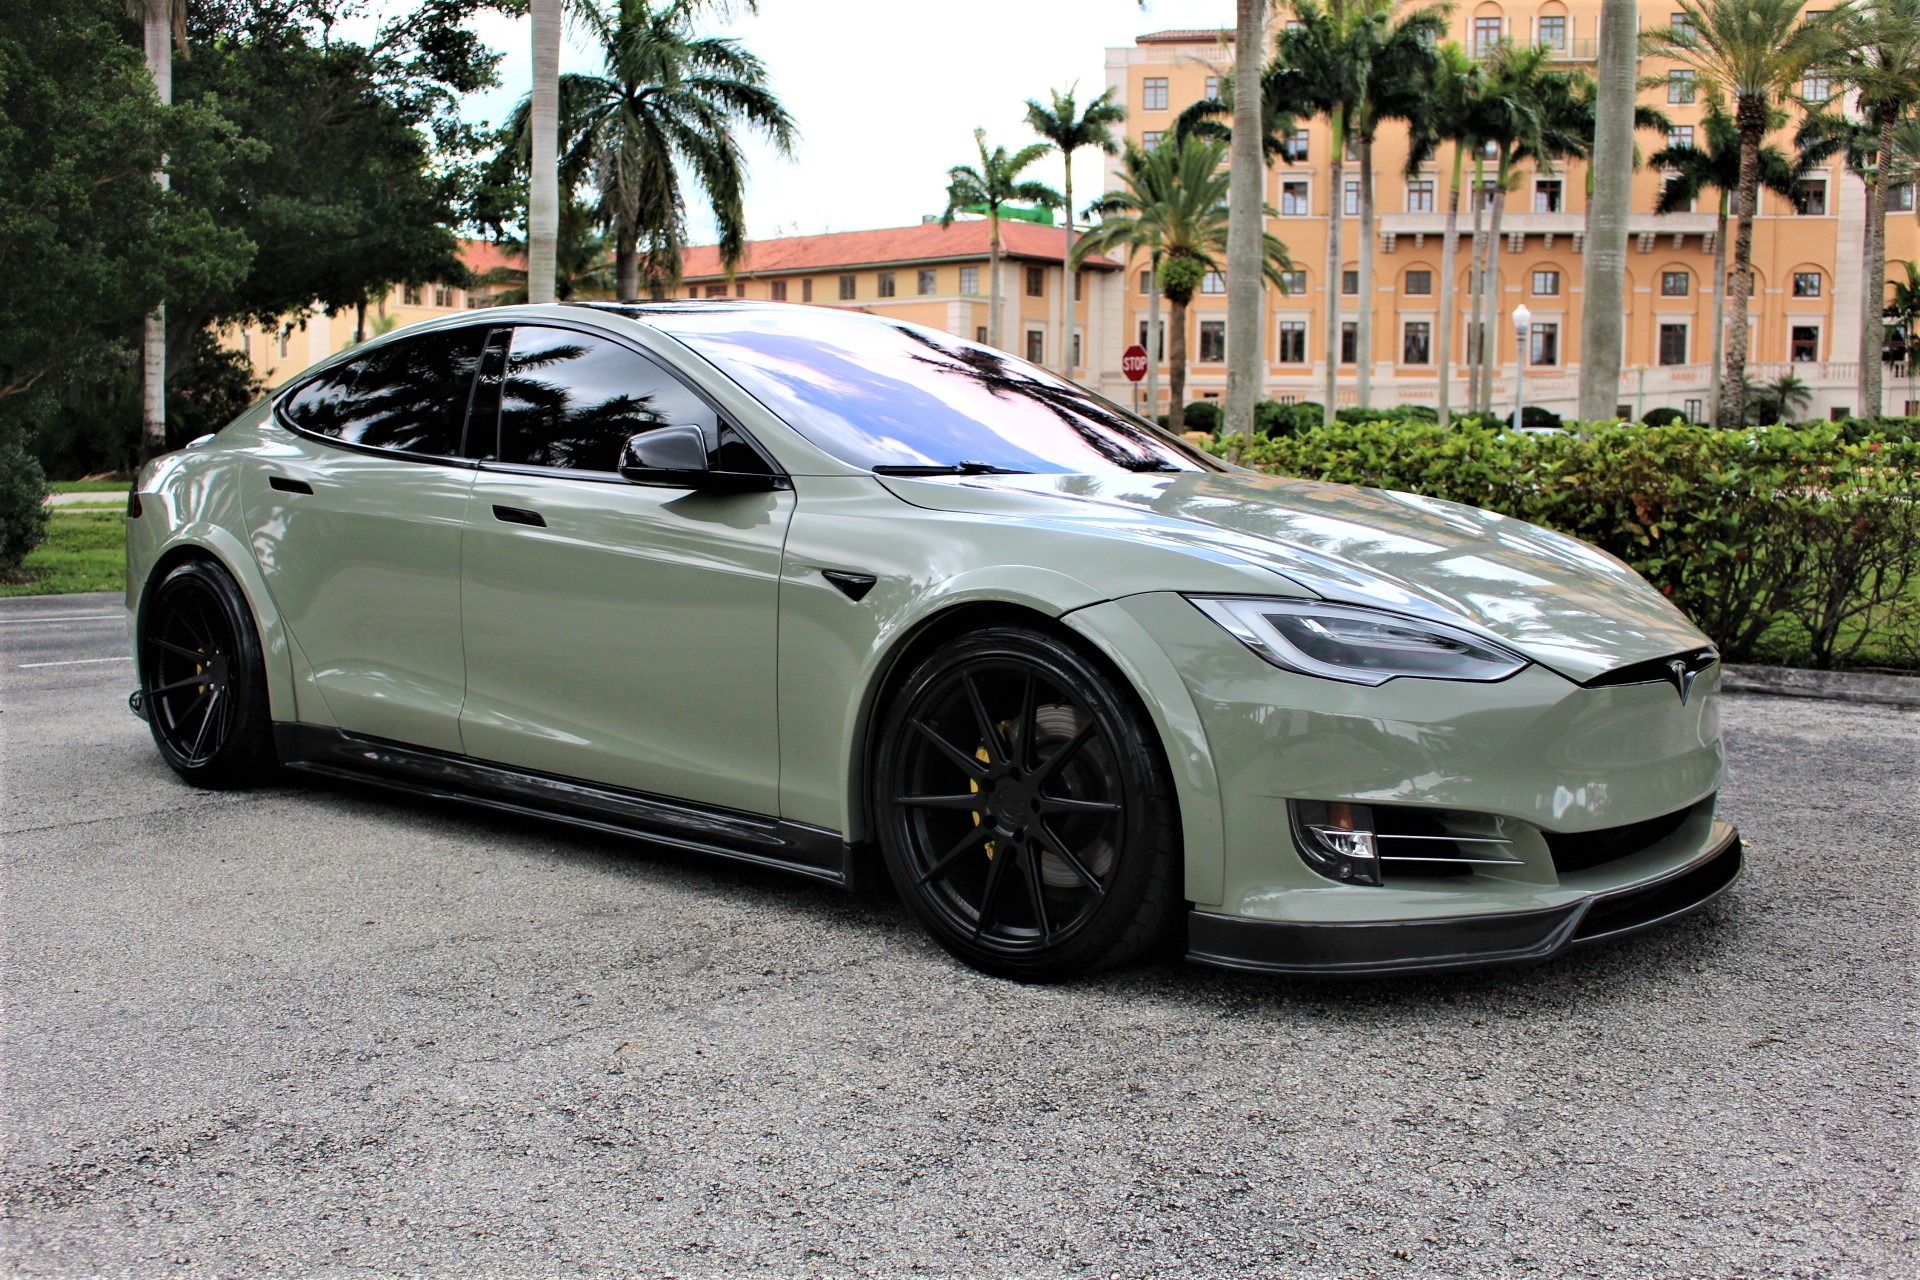 Used 2018 Tesla Model S P100D for sale Sold at The Gables Sports Cars in Miami FL 33146 3